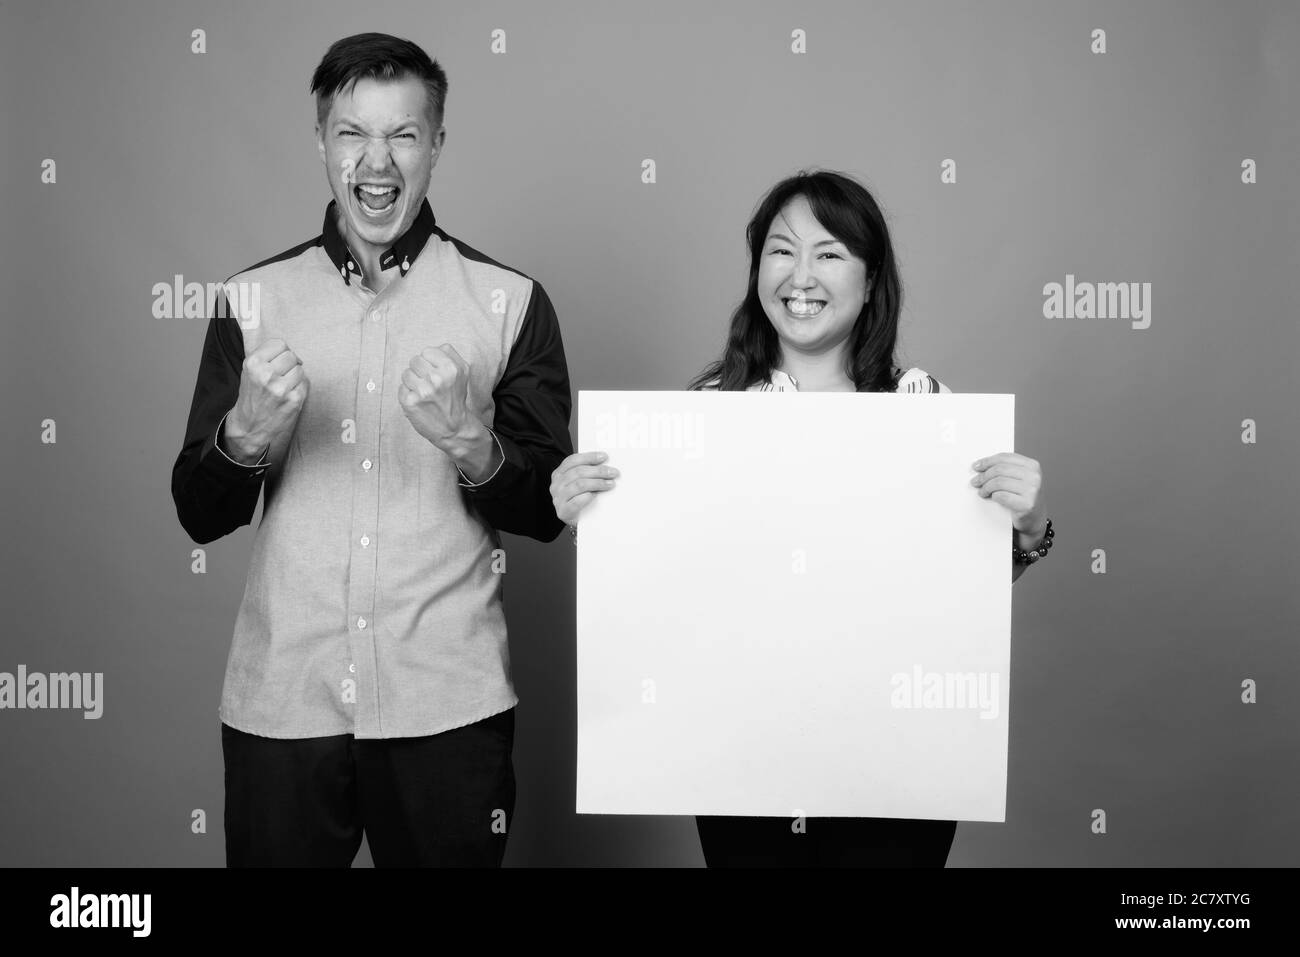 Portrait of young handsome businessman and mature Asian businesswoman together with white board Stock Photo